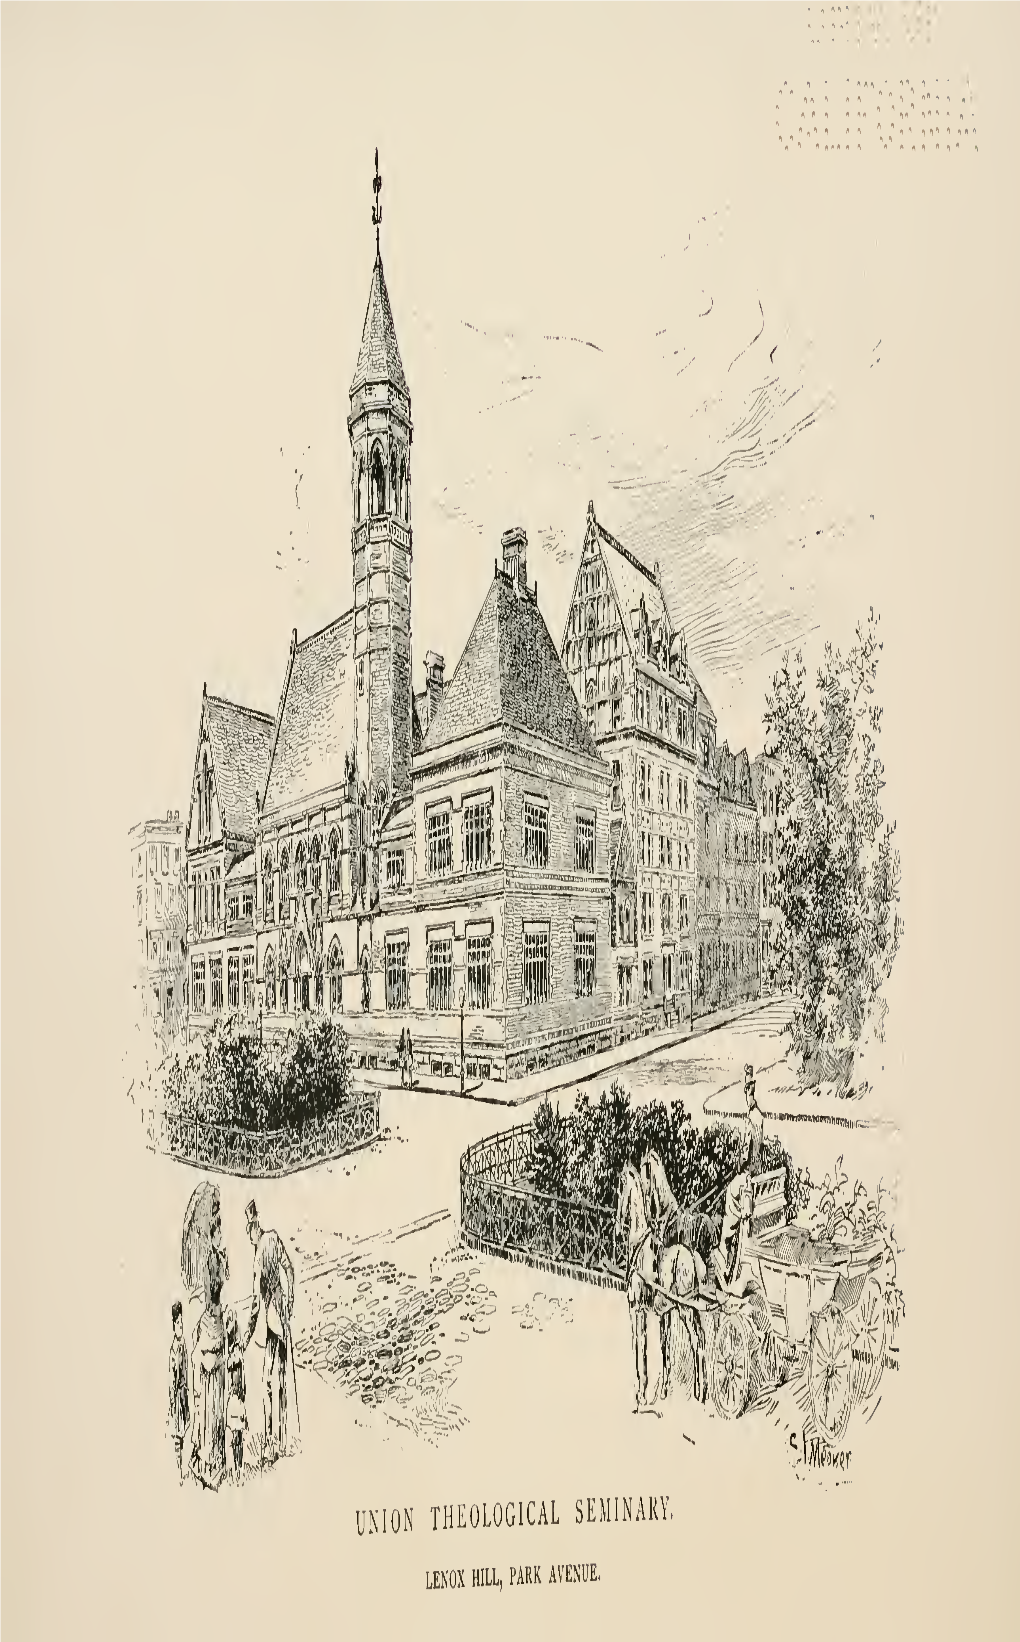 The Union Theological Seminary in the City of New